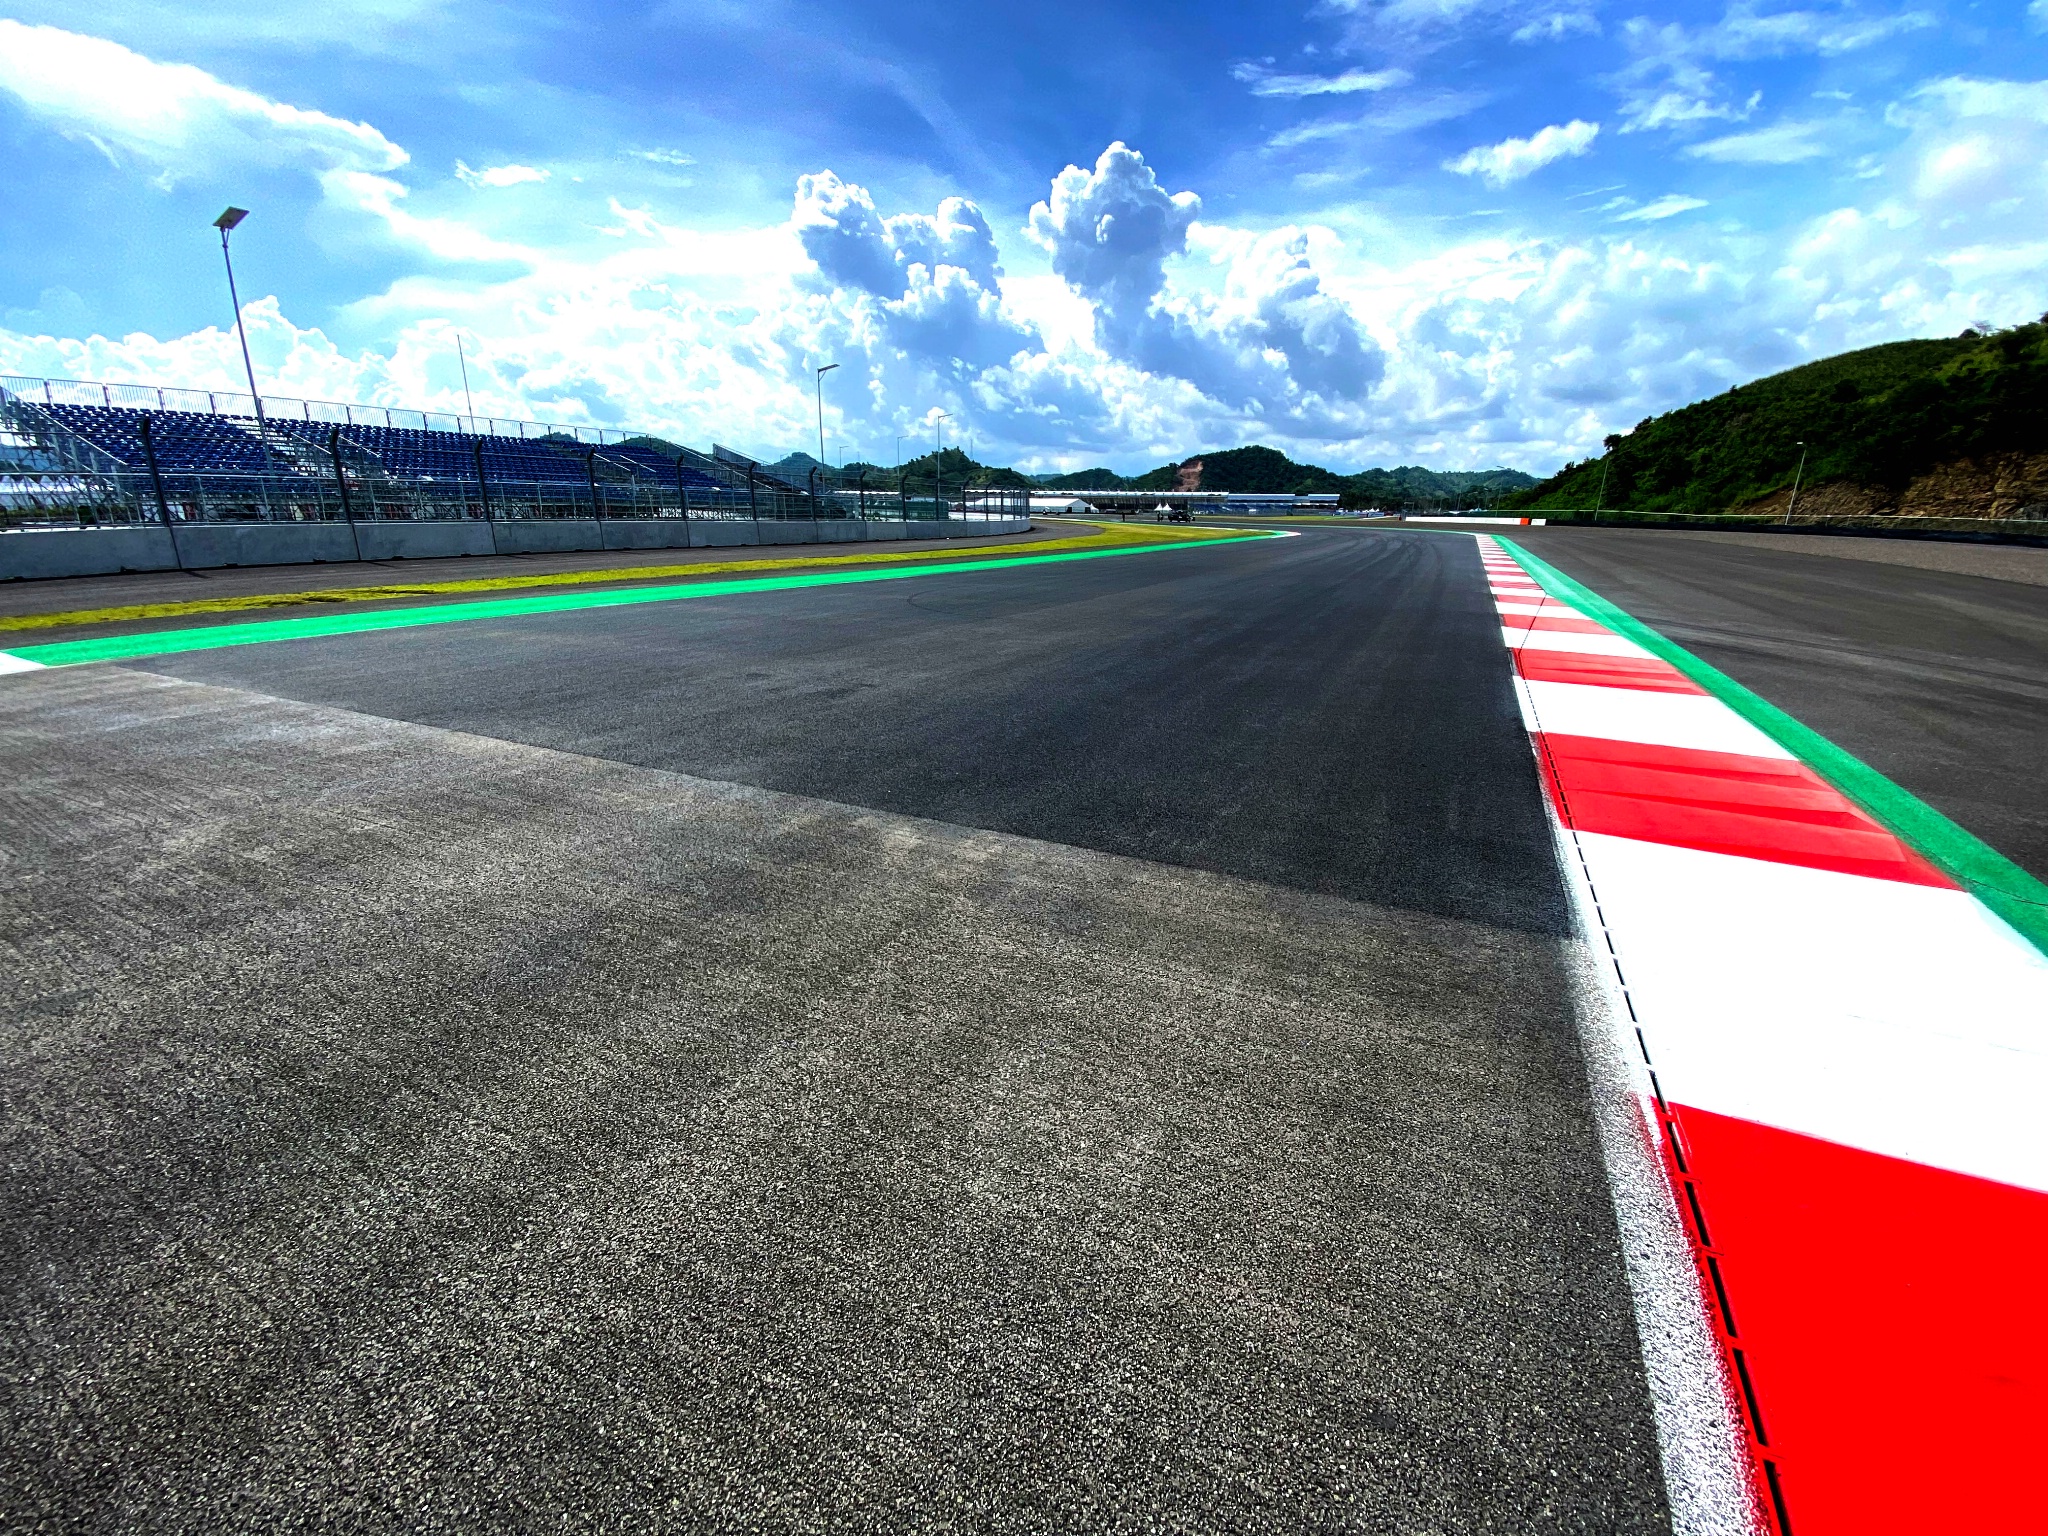 Resurface of track, Indonesian MotoGP, 14 March 2022